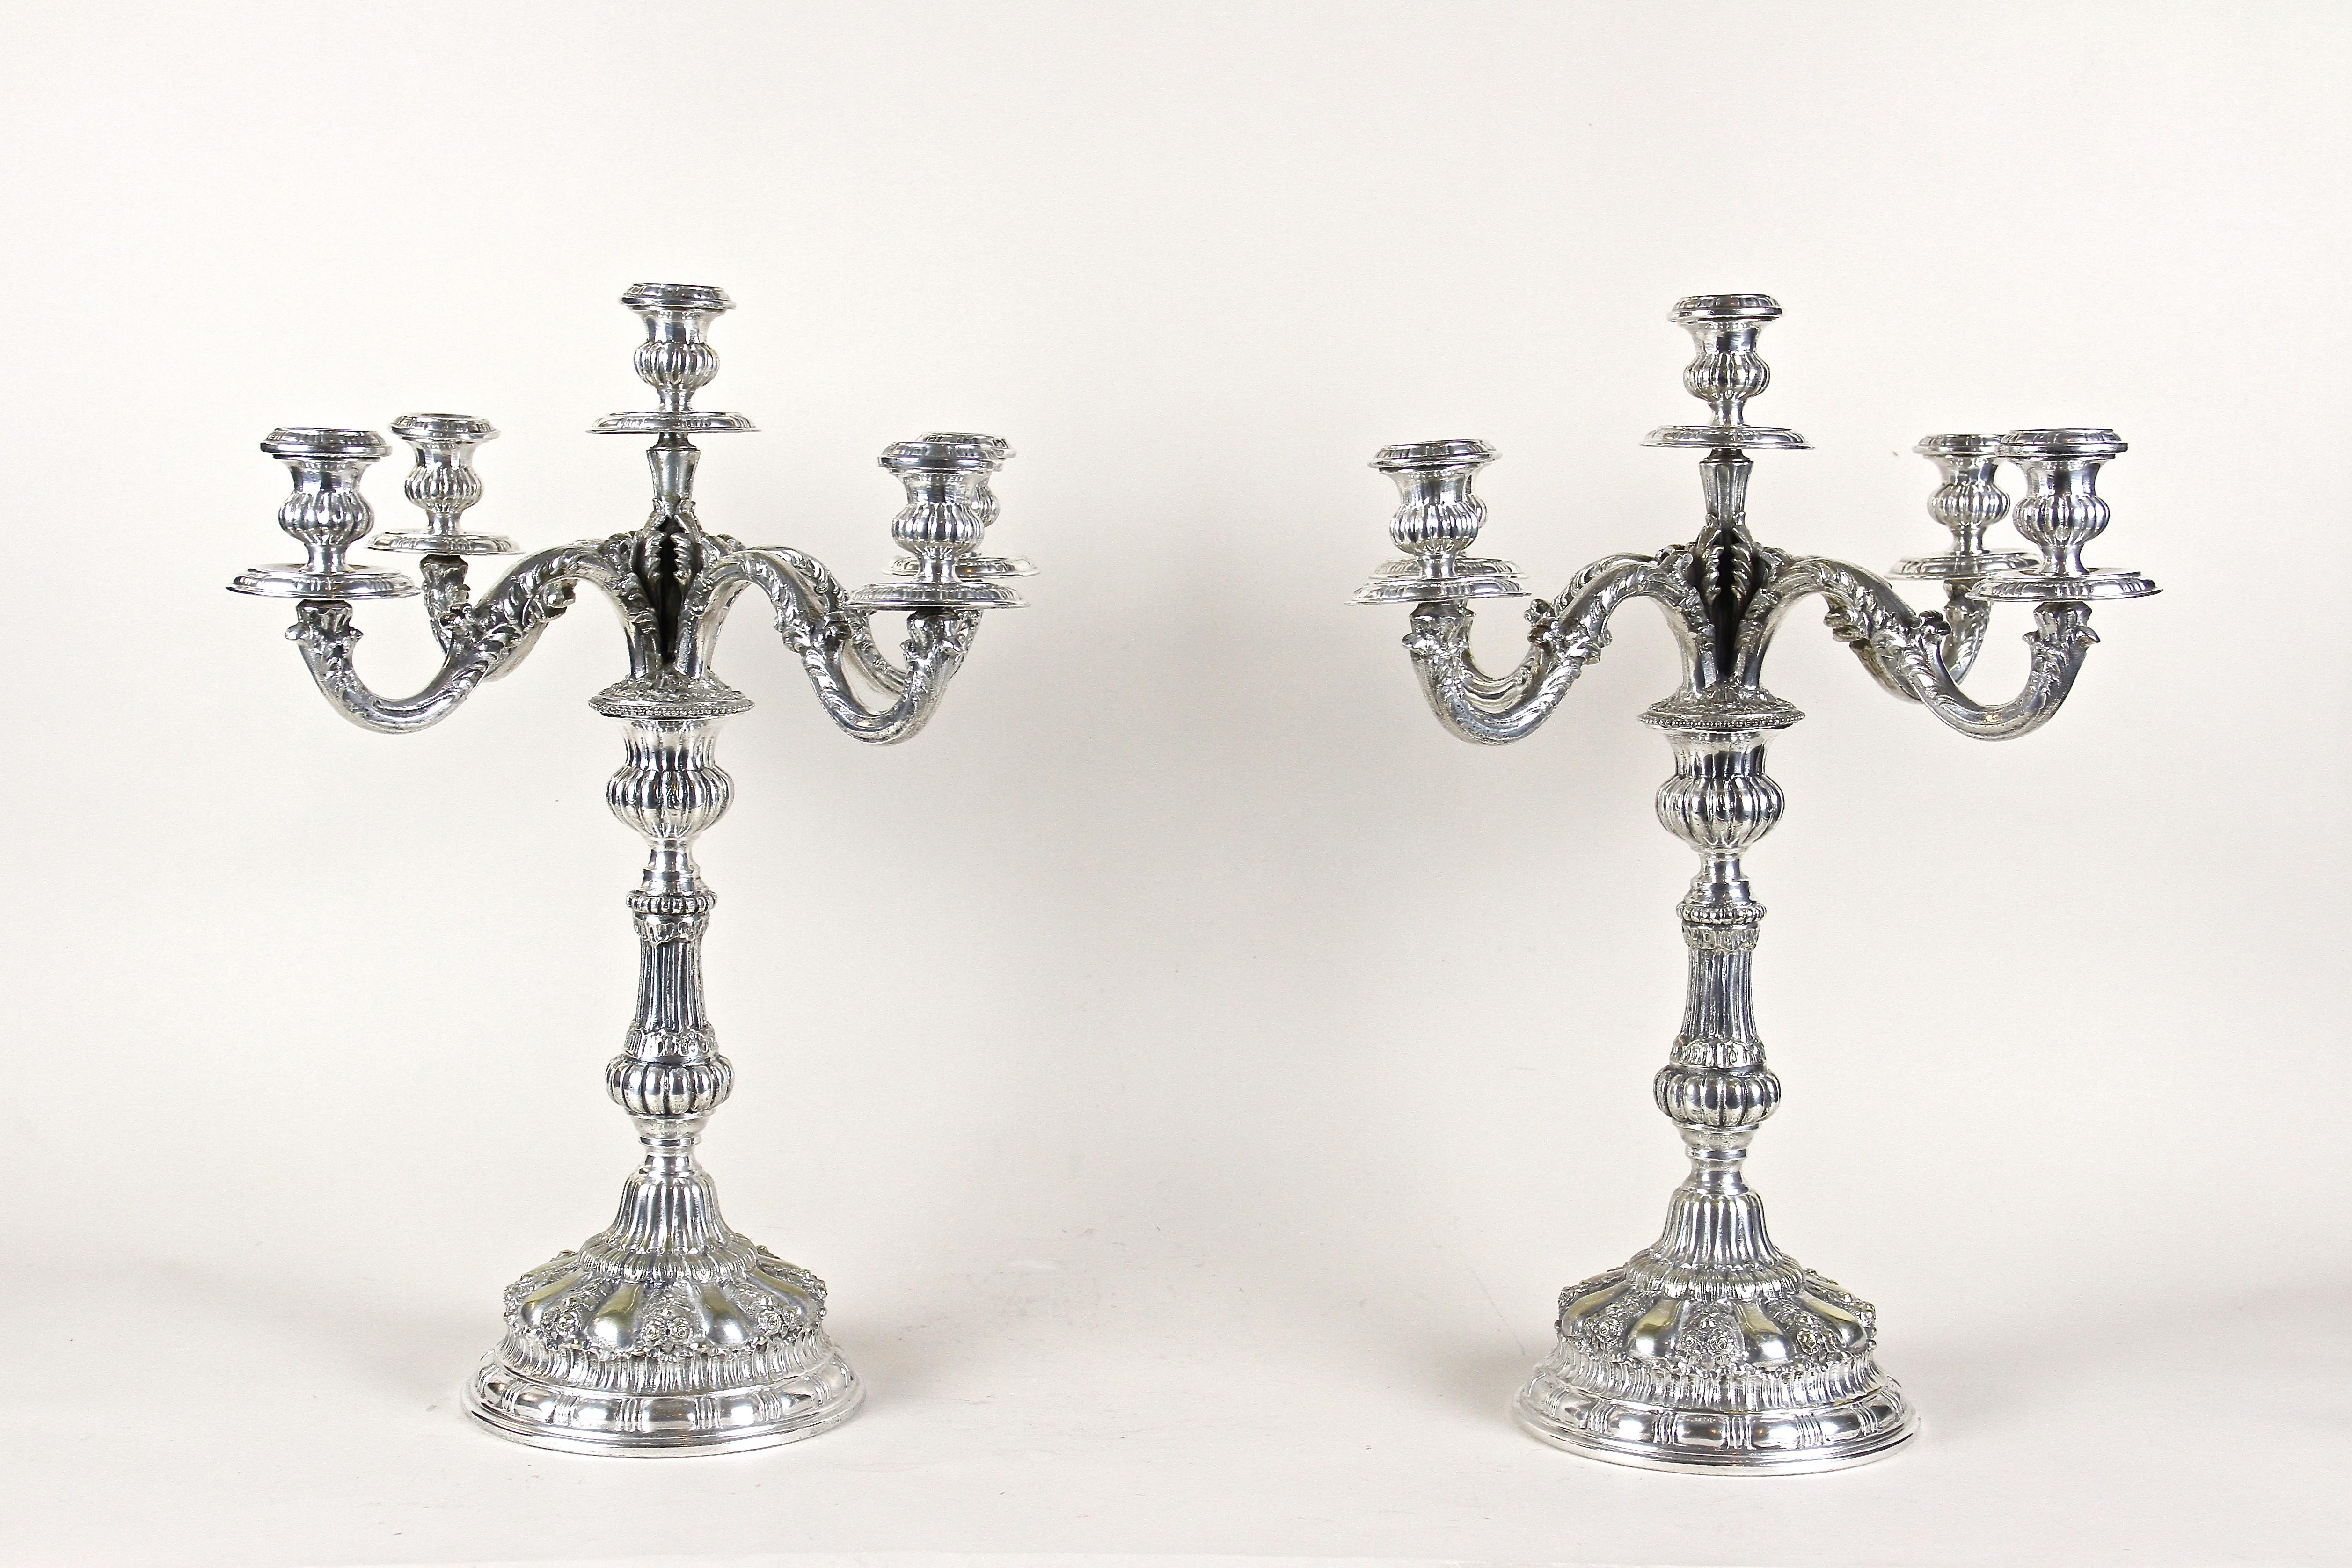 Magnificent pair of mid-19th century silvered candelabras coming out of Austria from the period around 1860. Absolute artfully designed with incredible small details, these large exceptional vienesse candelabras were elaborately hand chased out of